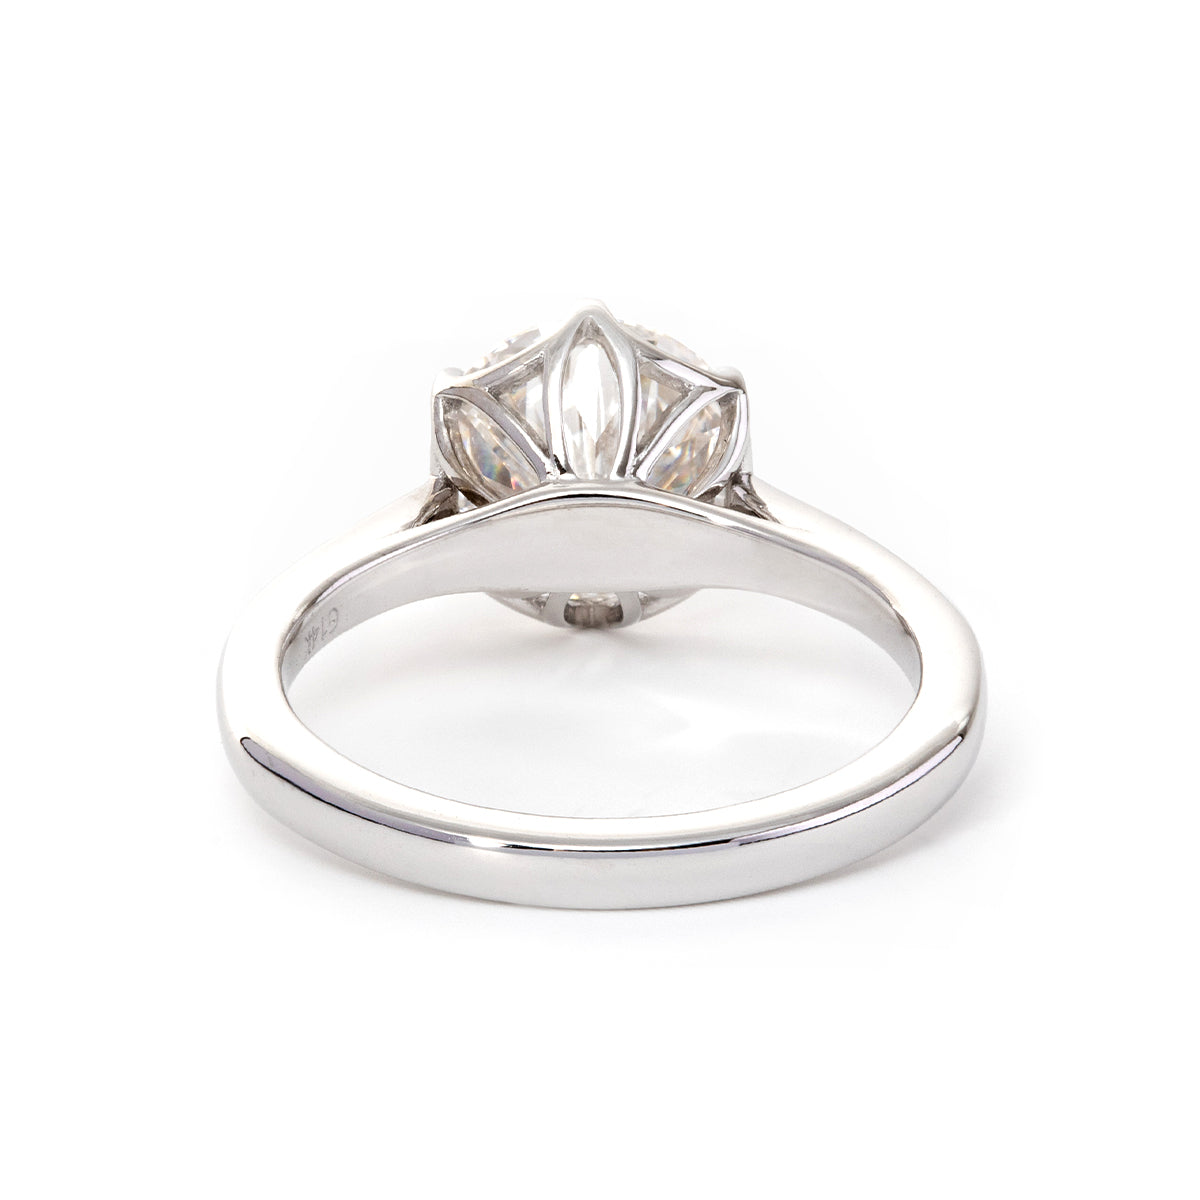 Transitional Cut Round Diamond Flower Basket Solitaire Engagement Ring